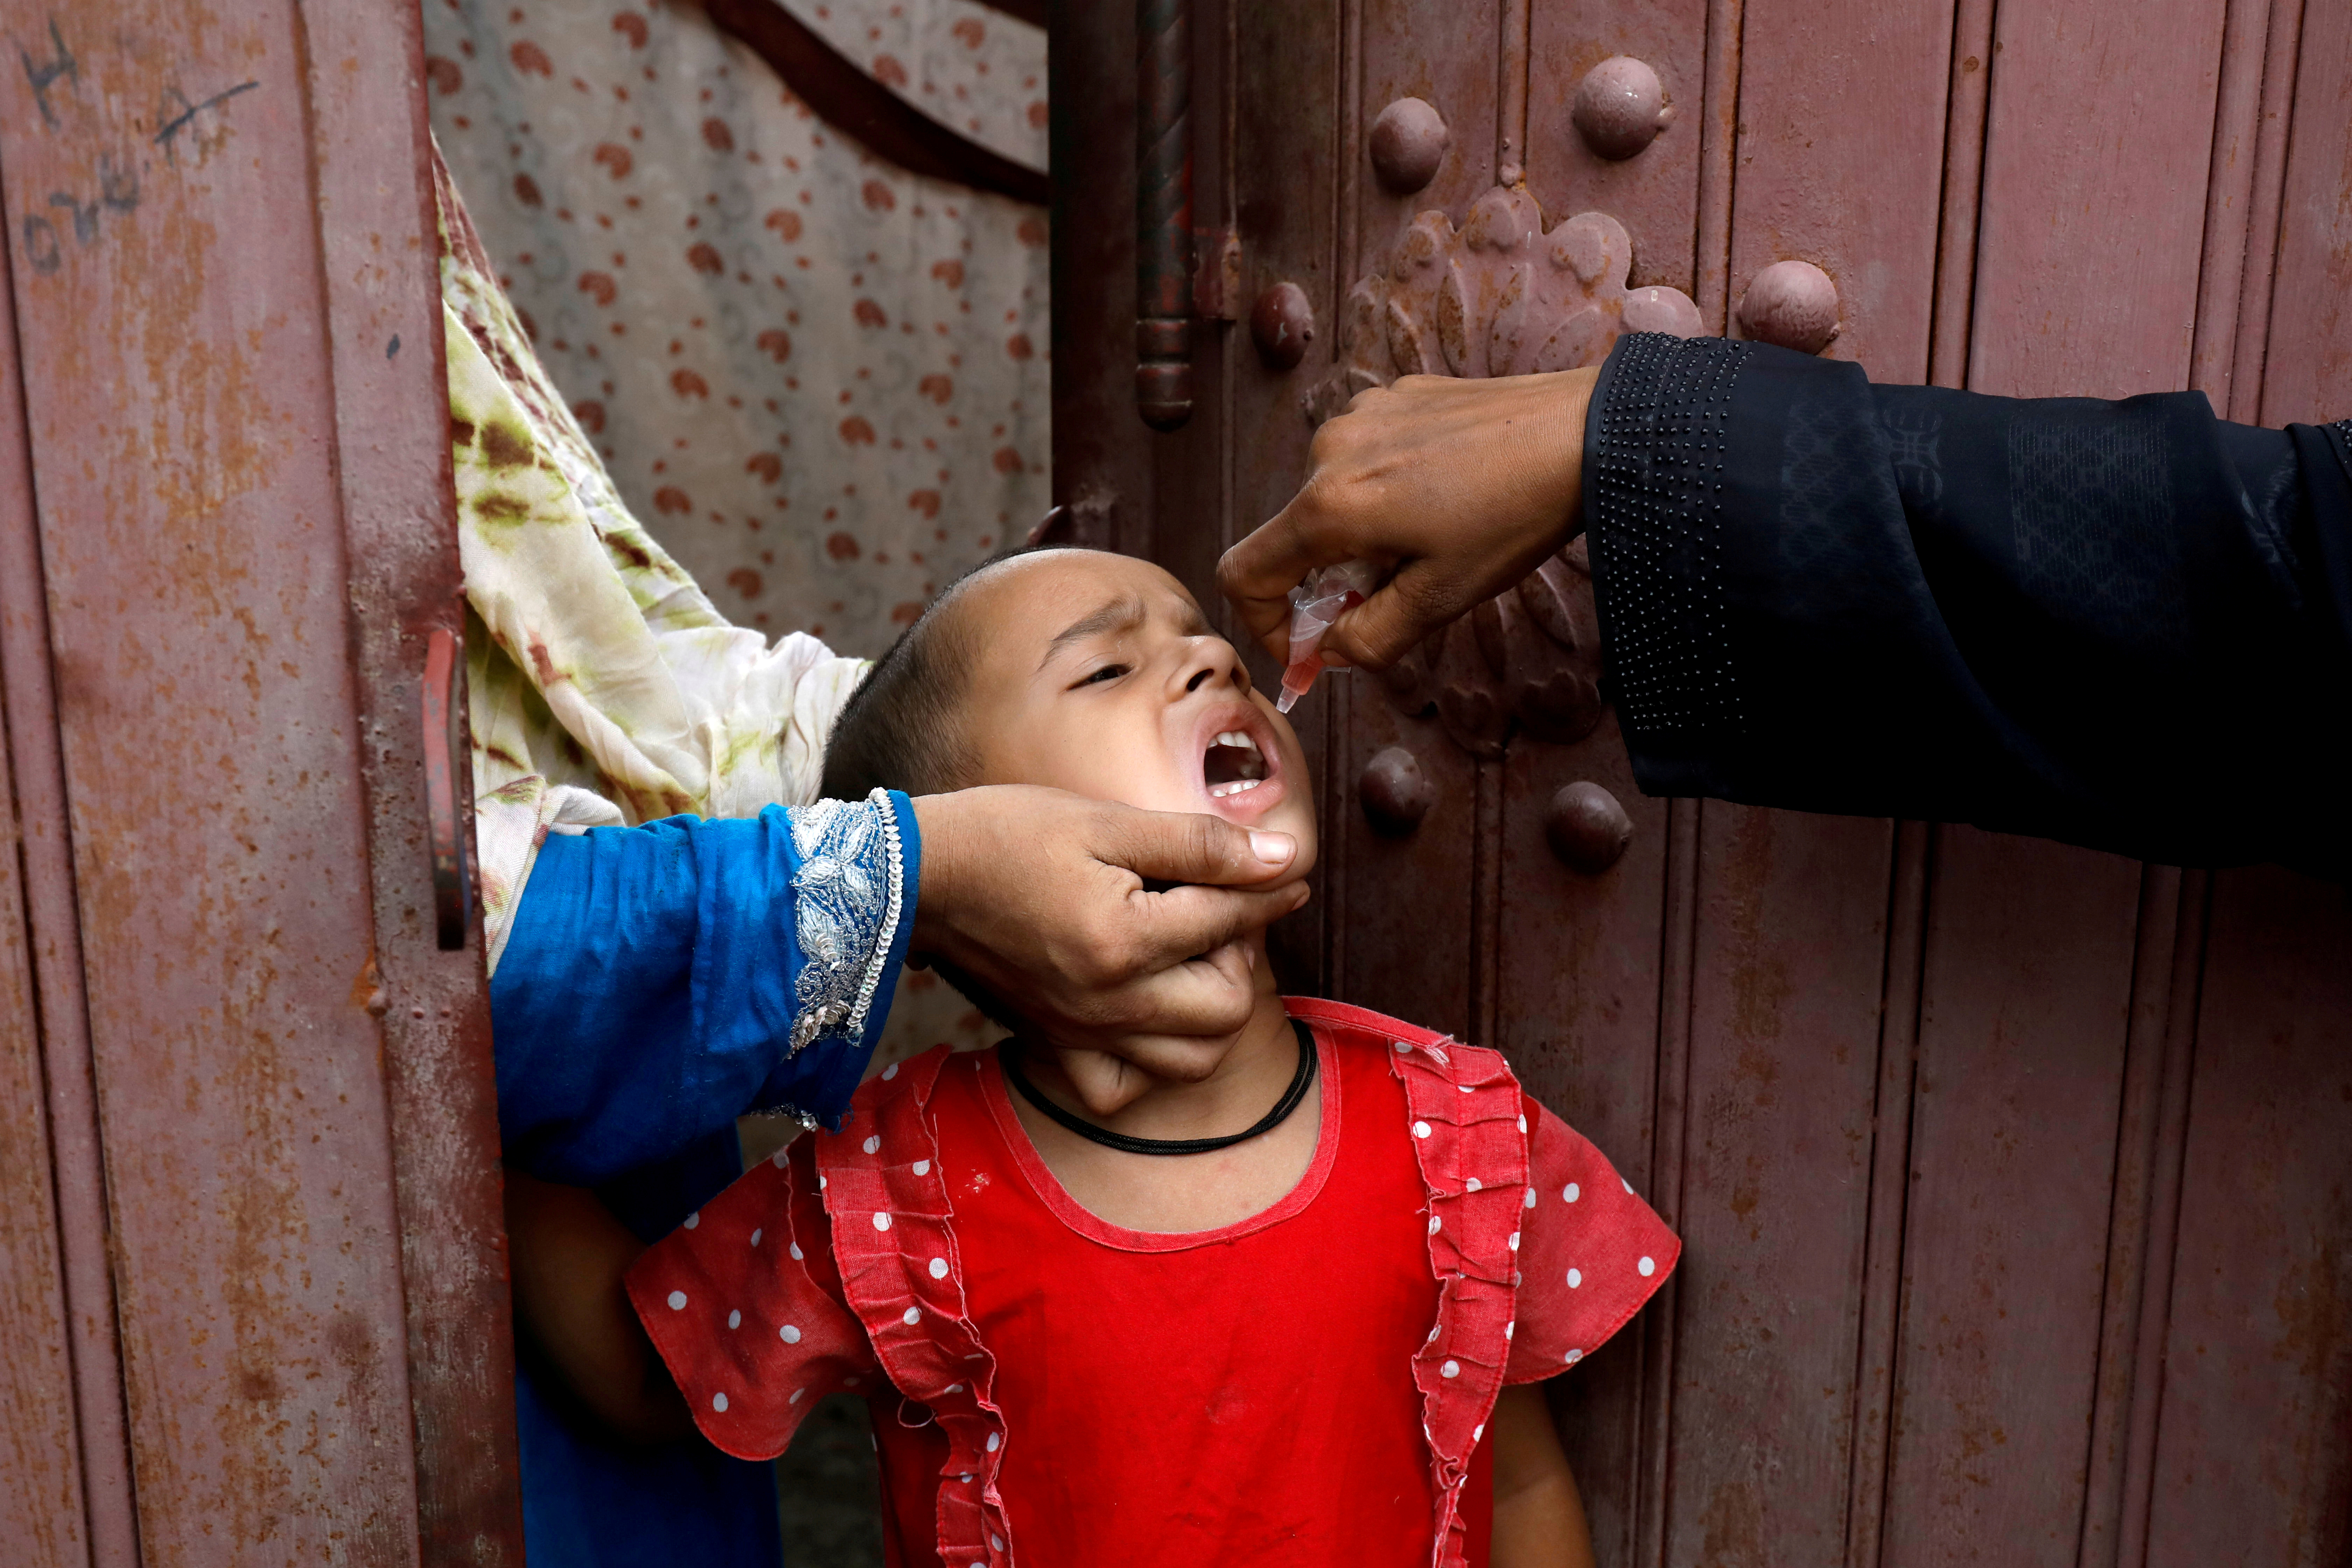 FILE PHOTO: A girl receives polio vaccine drops, during an anti-polio campaign, in a low-income neighborhood as the spread of the coronavirus disease (COVID-19) continues, in Karachi, Pakistan July 20, 2020. REUTERS/Akhtar Soomro/File Photo